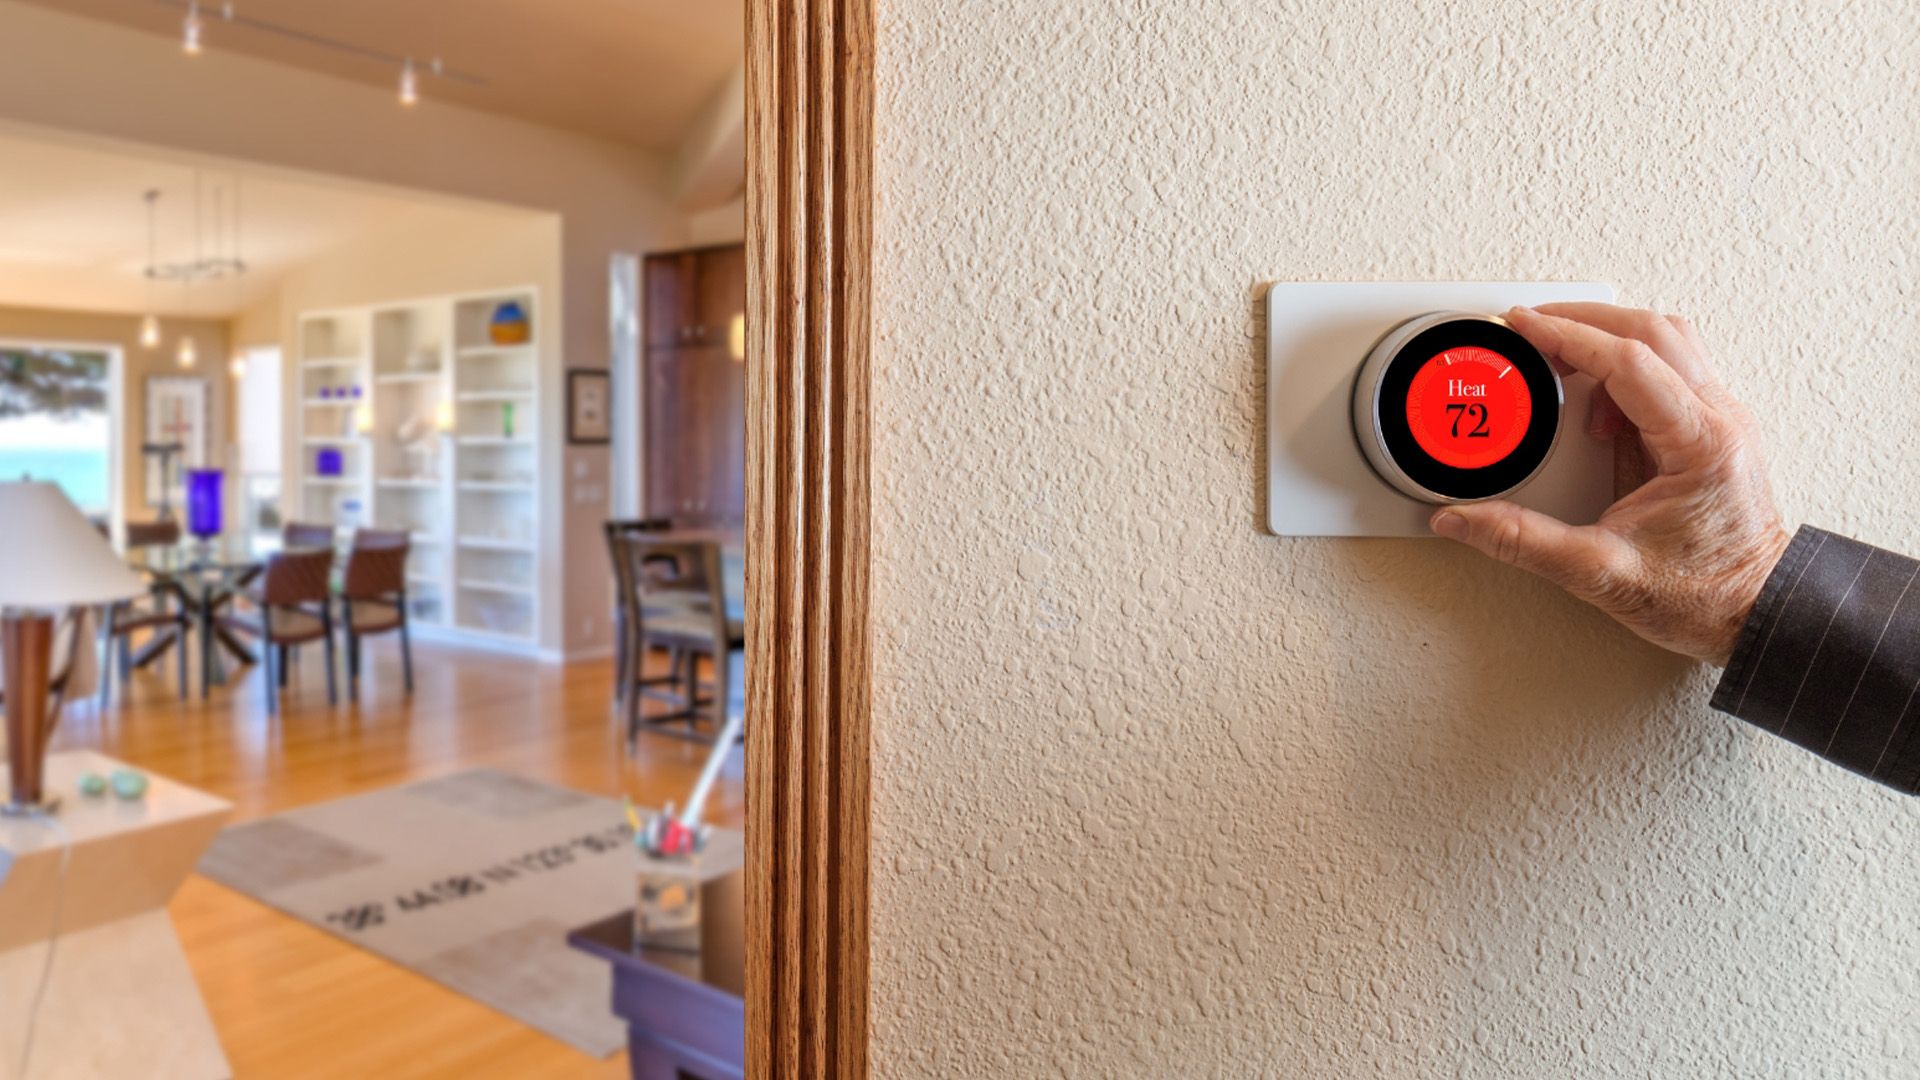 image of a smart thermostat